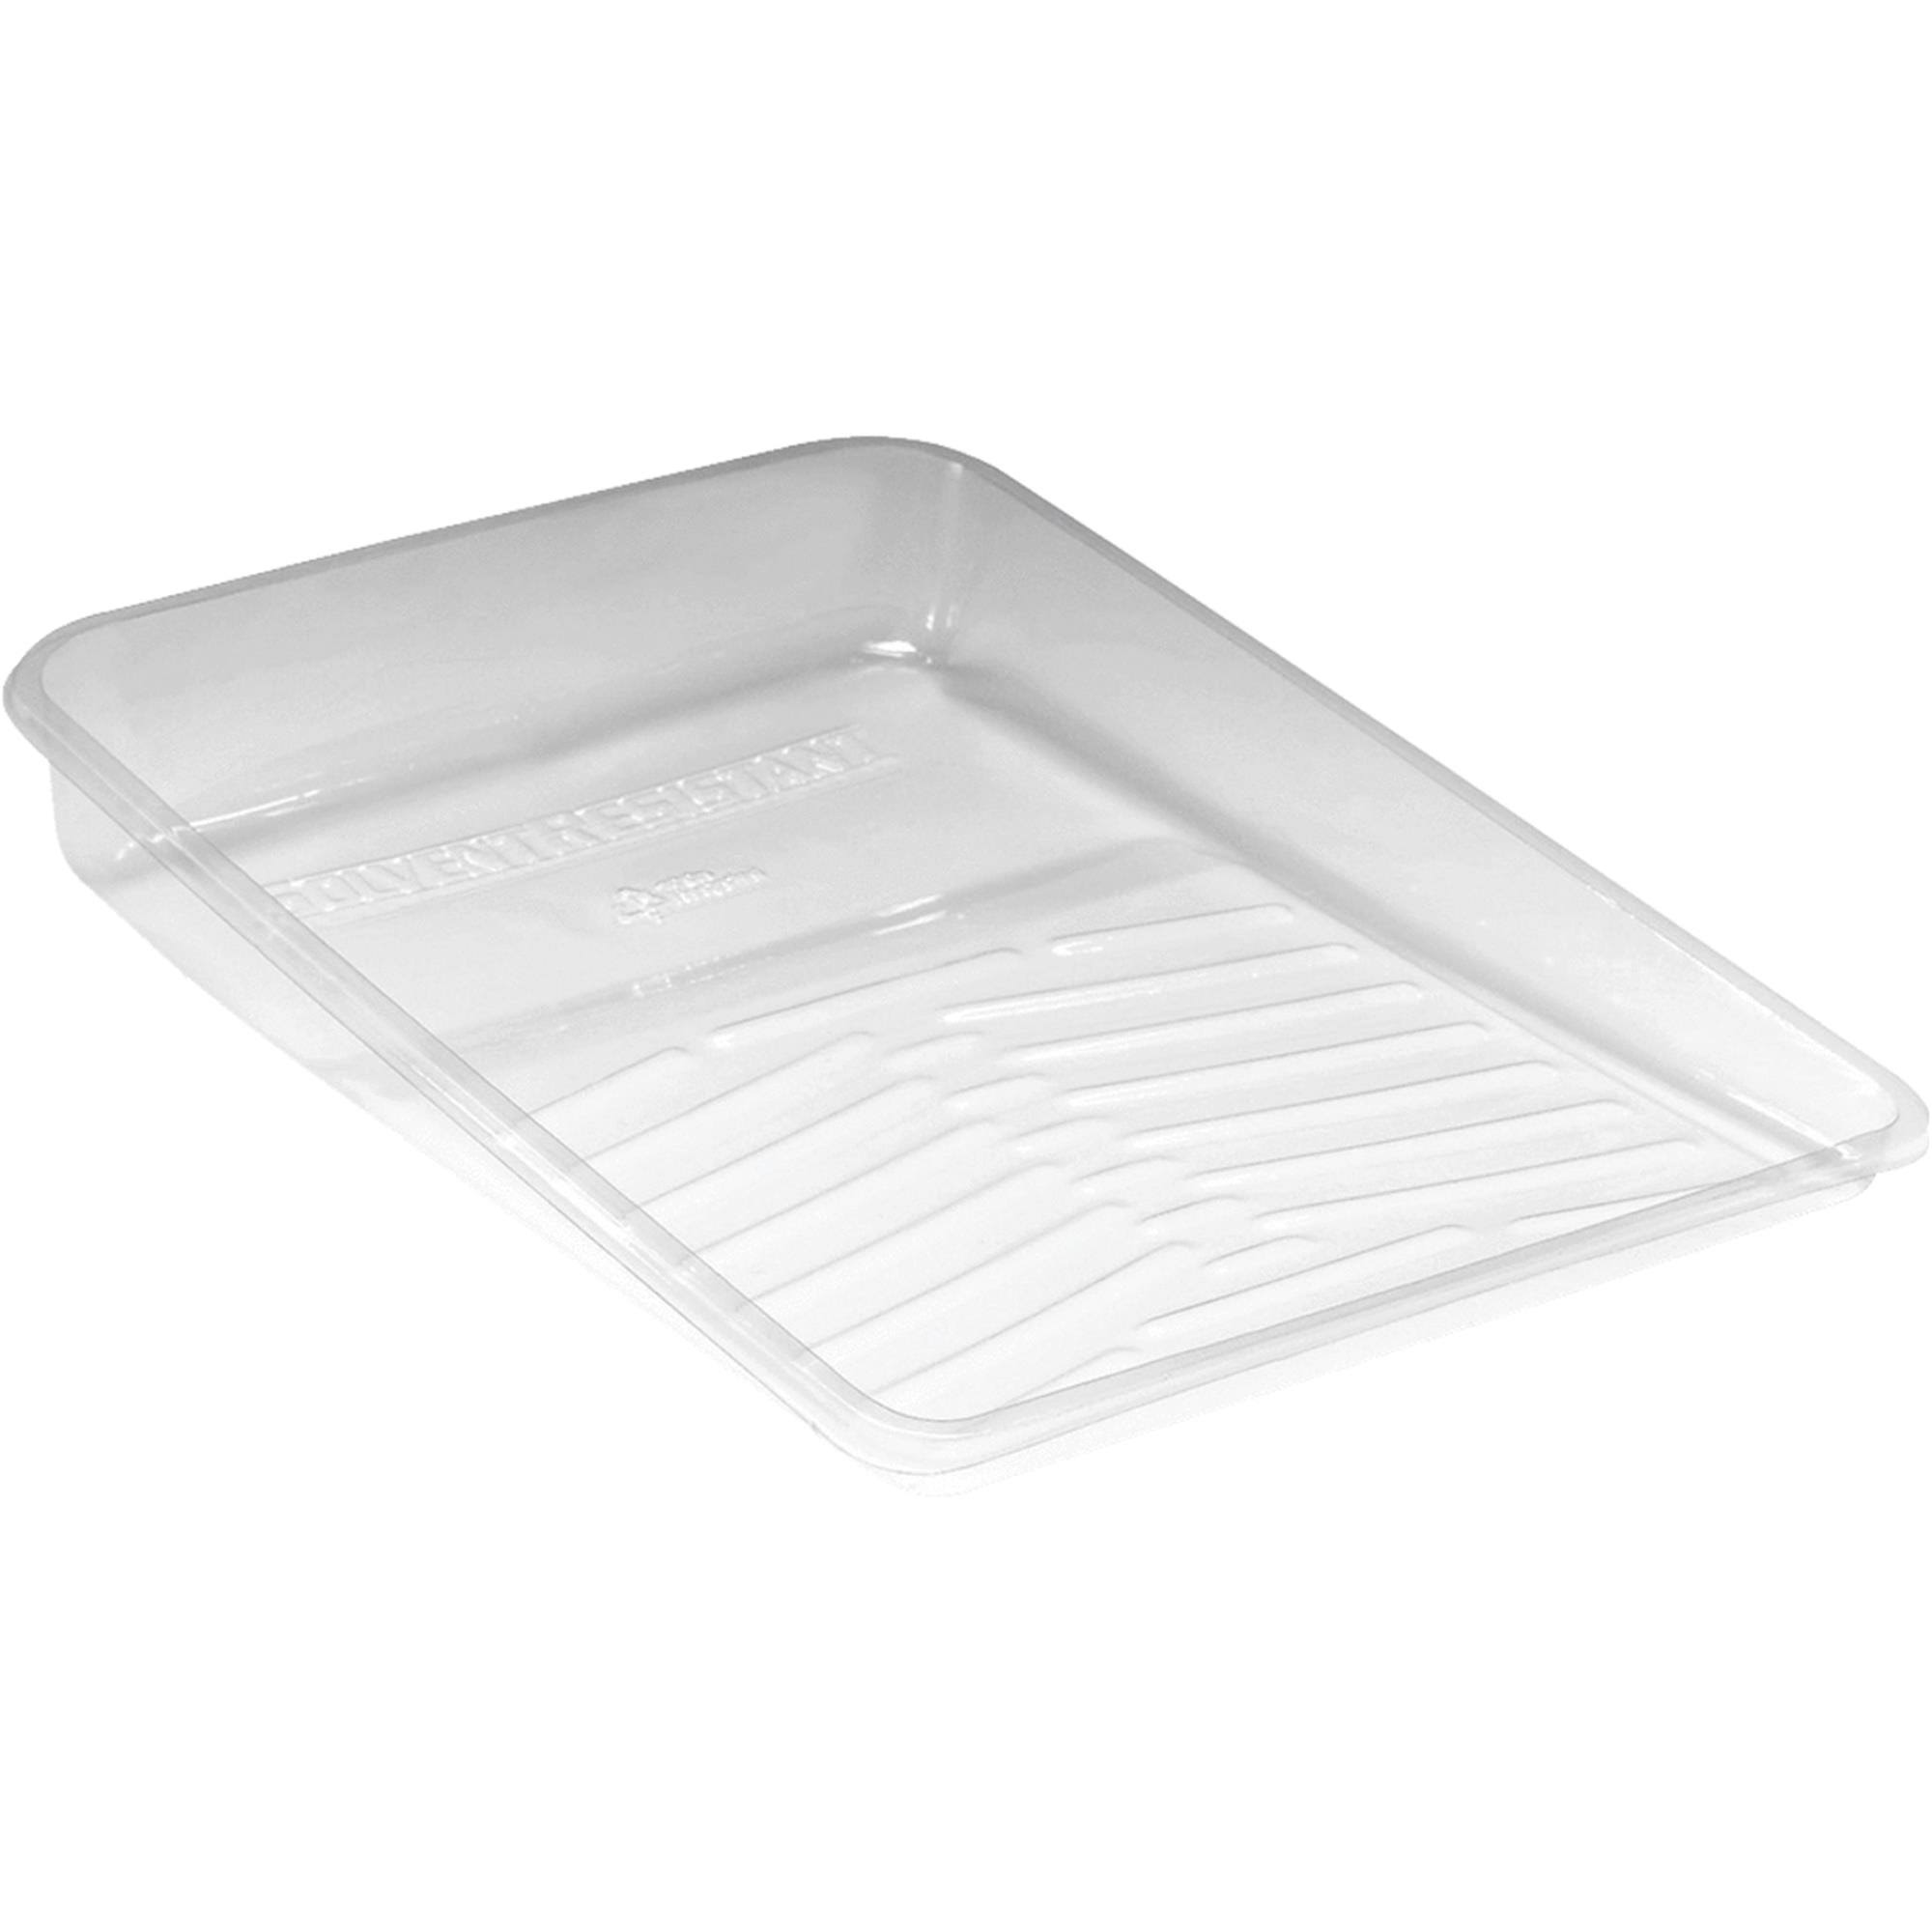 Wooster Brush Plastic Tray - Clear, 11"